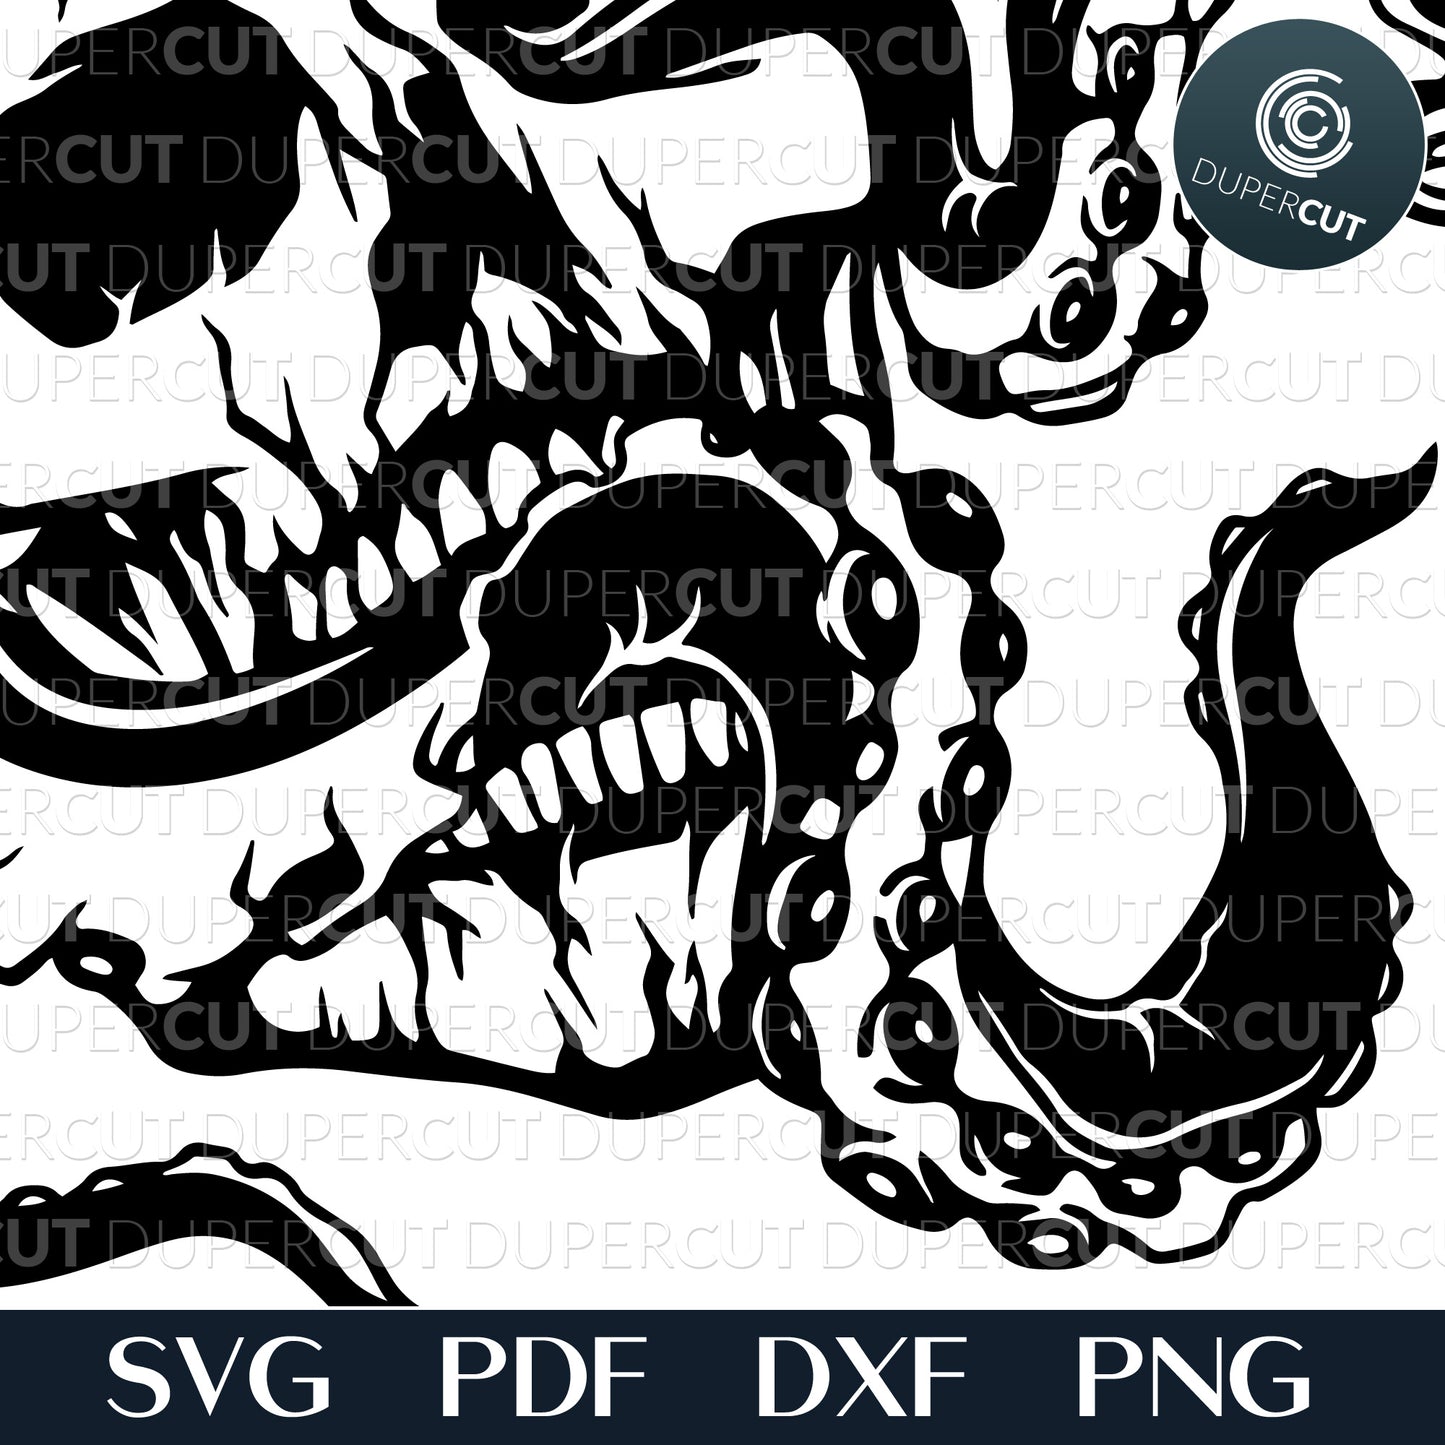 Octopus skull head gothic vector files - SVG DXF PNG cutting template for Cricut, Silhouette, laser engraving, sublimation.